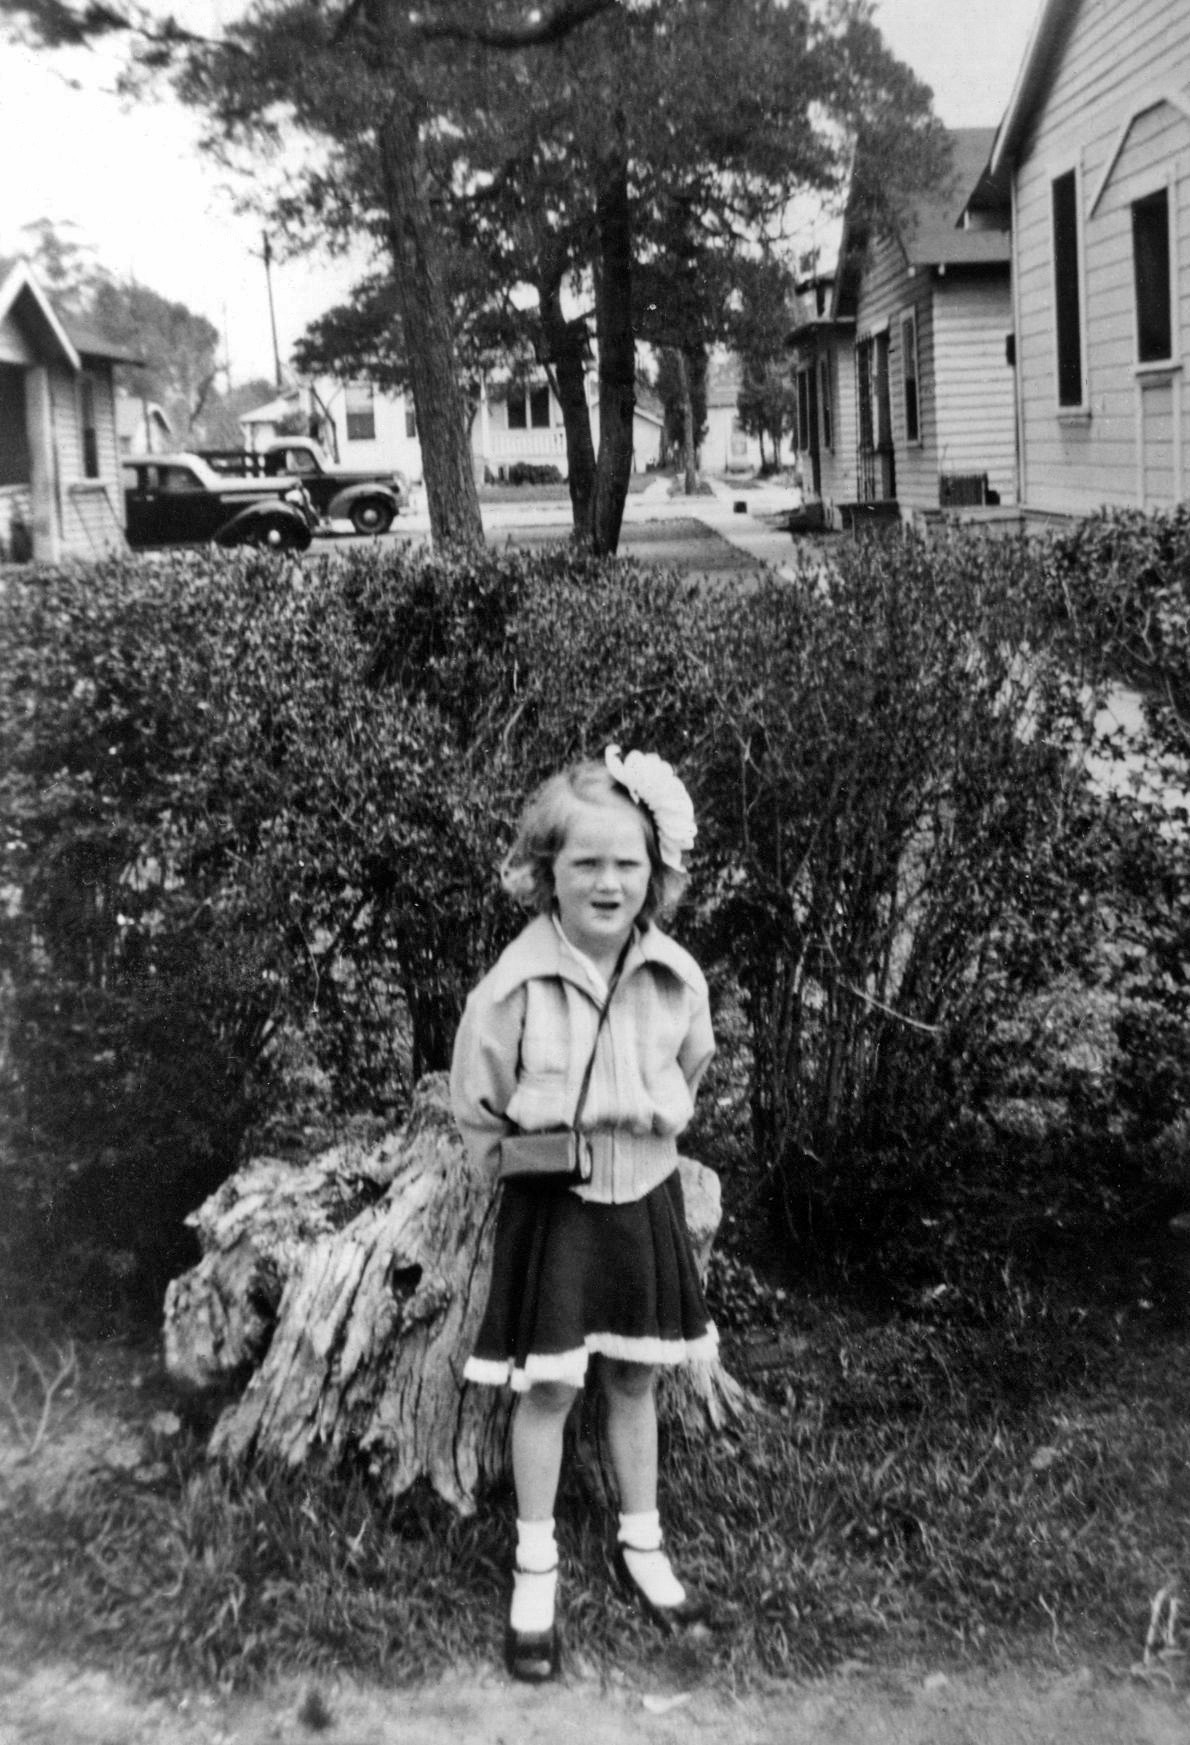 Long before there was a Honey Boo Boo in front of the camera, this little lady was in front of a lens. My suspicion is the buildings behind her are either the cabins of a resort, or a roadside motel that she and her family stayed at, and the photo was taken as a souvenir of that vacation. I bought it from an antique store in Simi Valley, California because of the great truck and car behind Miss Missing Teeth. View full size.